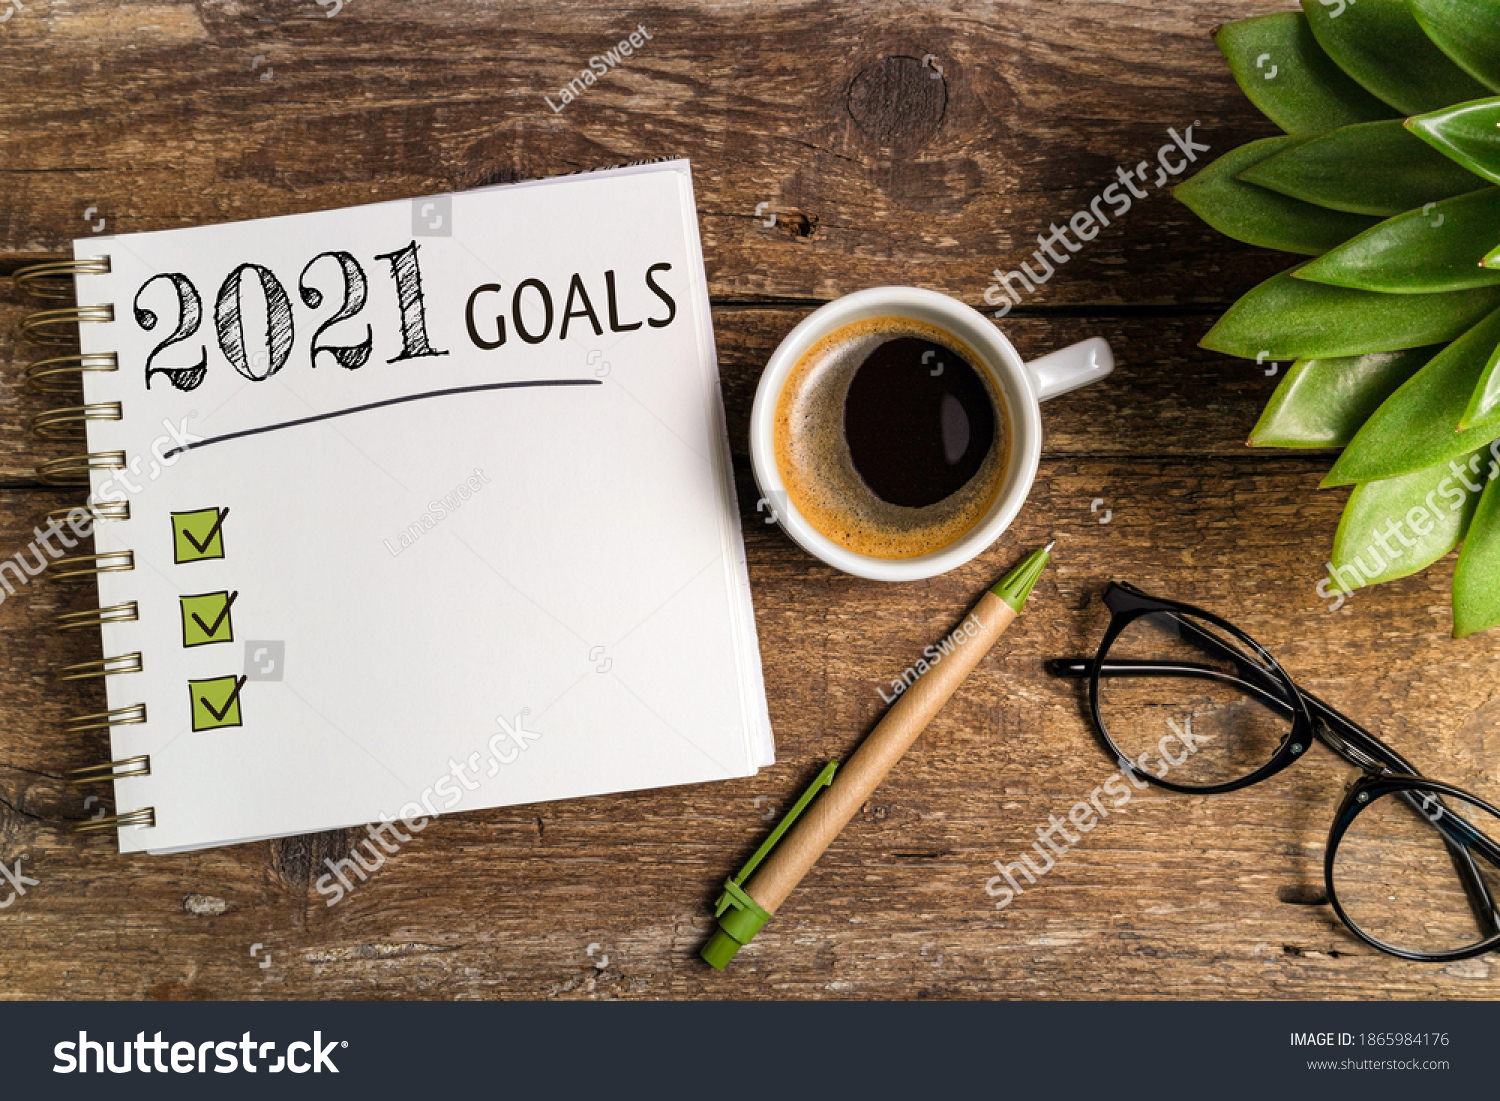 New year goals 2021 on desk. 2021 goals list with notebook, coffee cup, plant on wooden table. Resolutions, plan, goals, checklist, idea concept. New Year 2021 template, copy space
 #1865984176